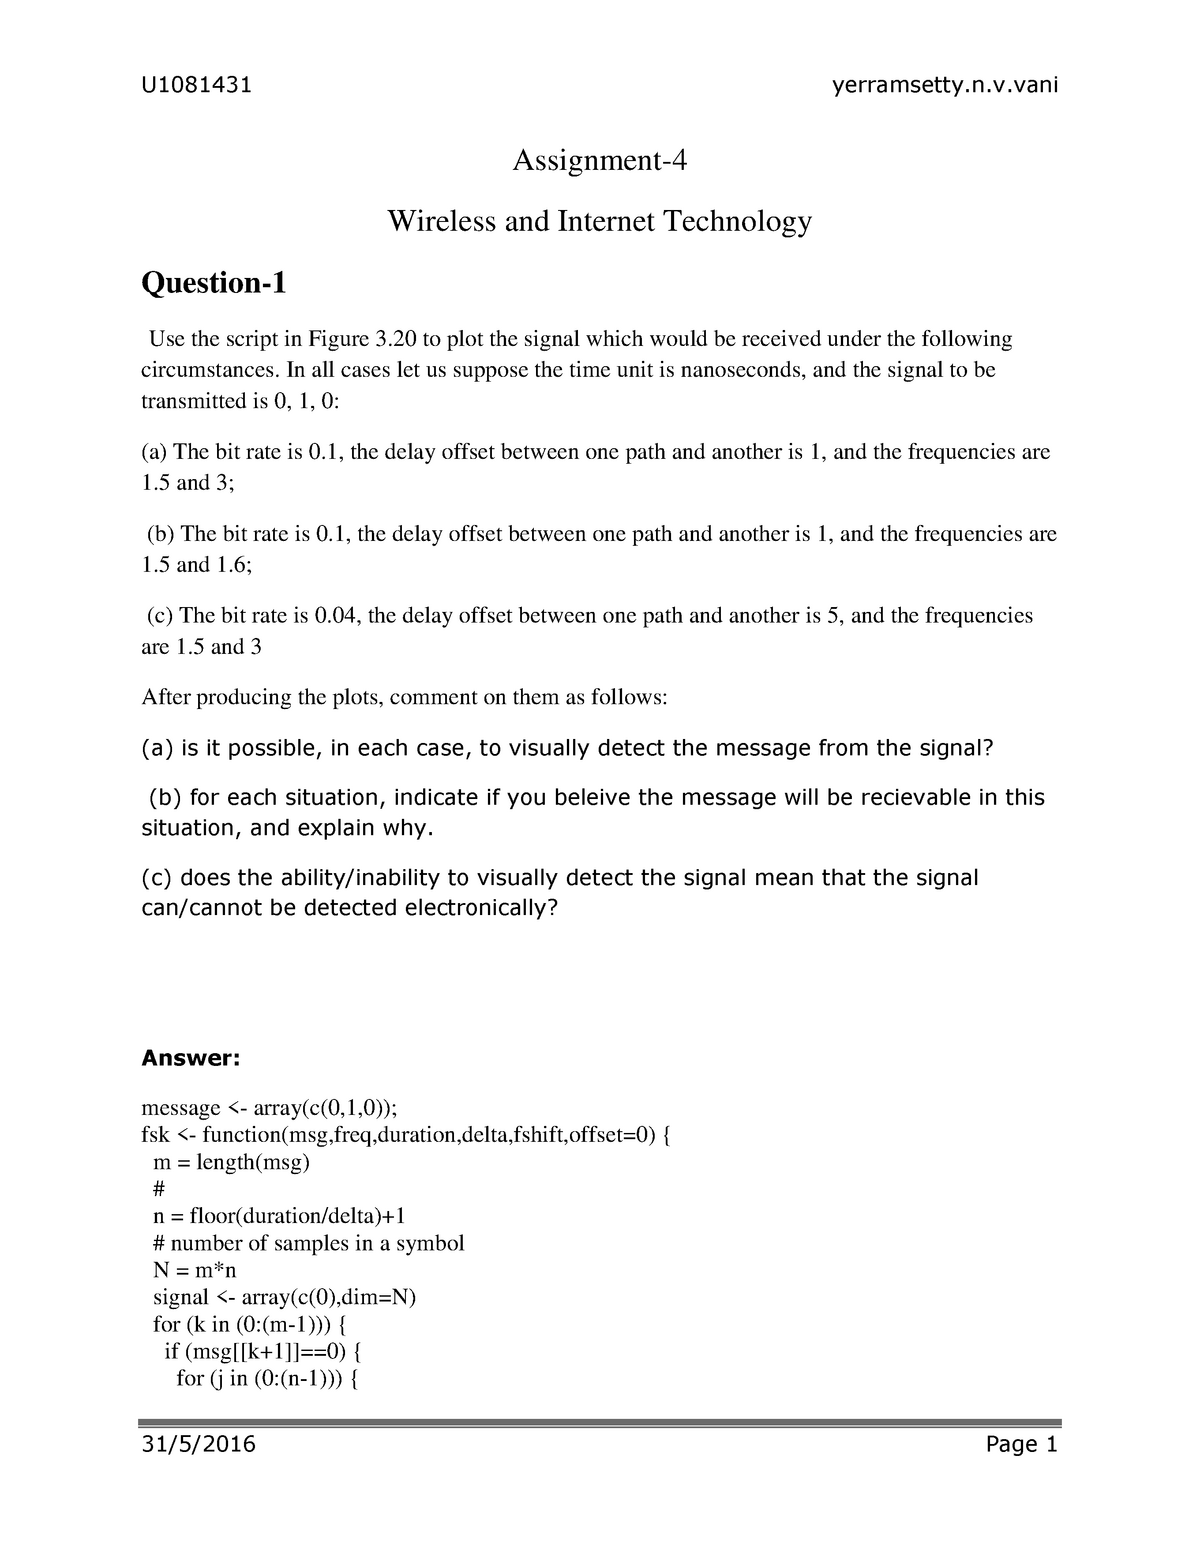 essay about wireless technology